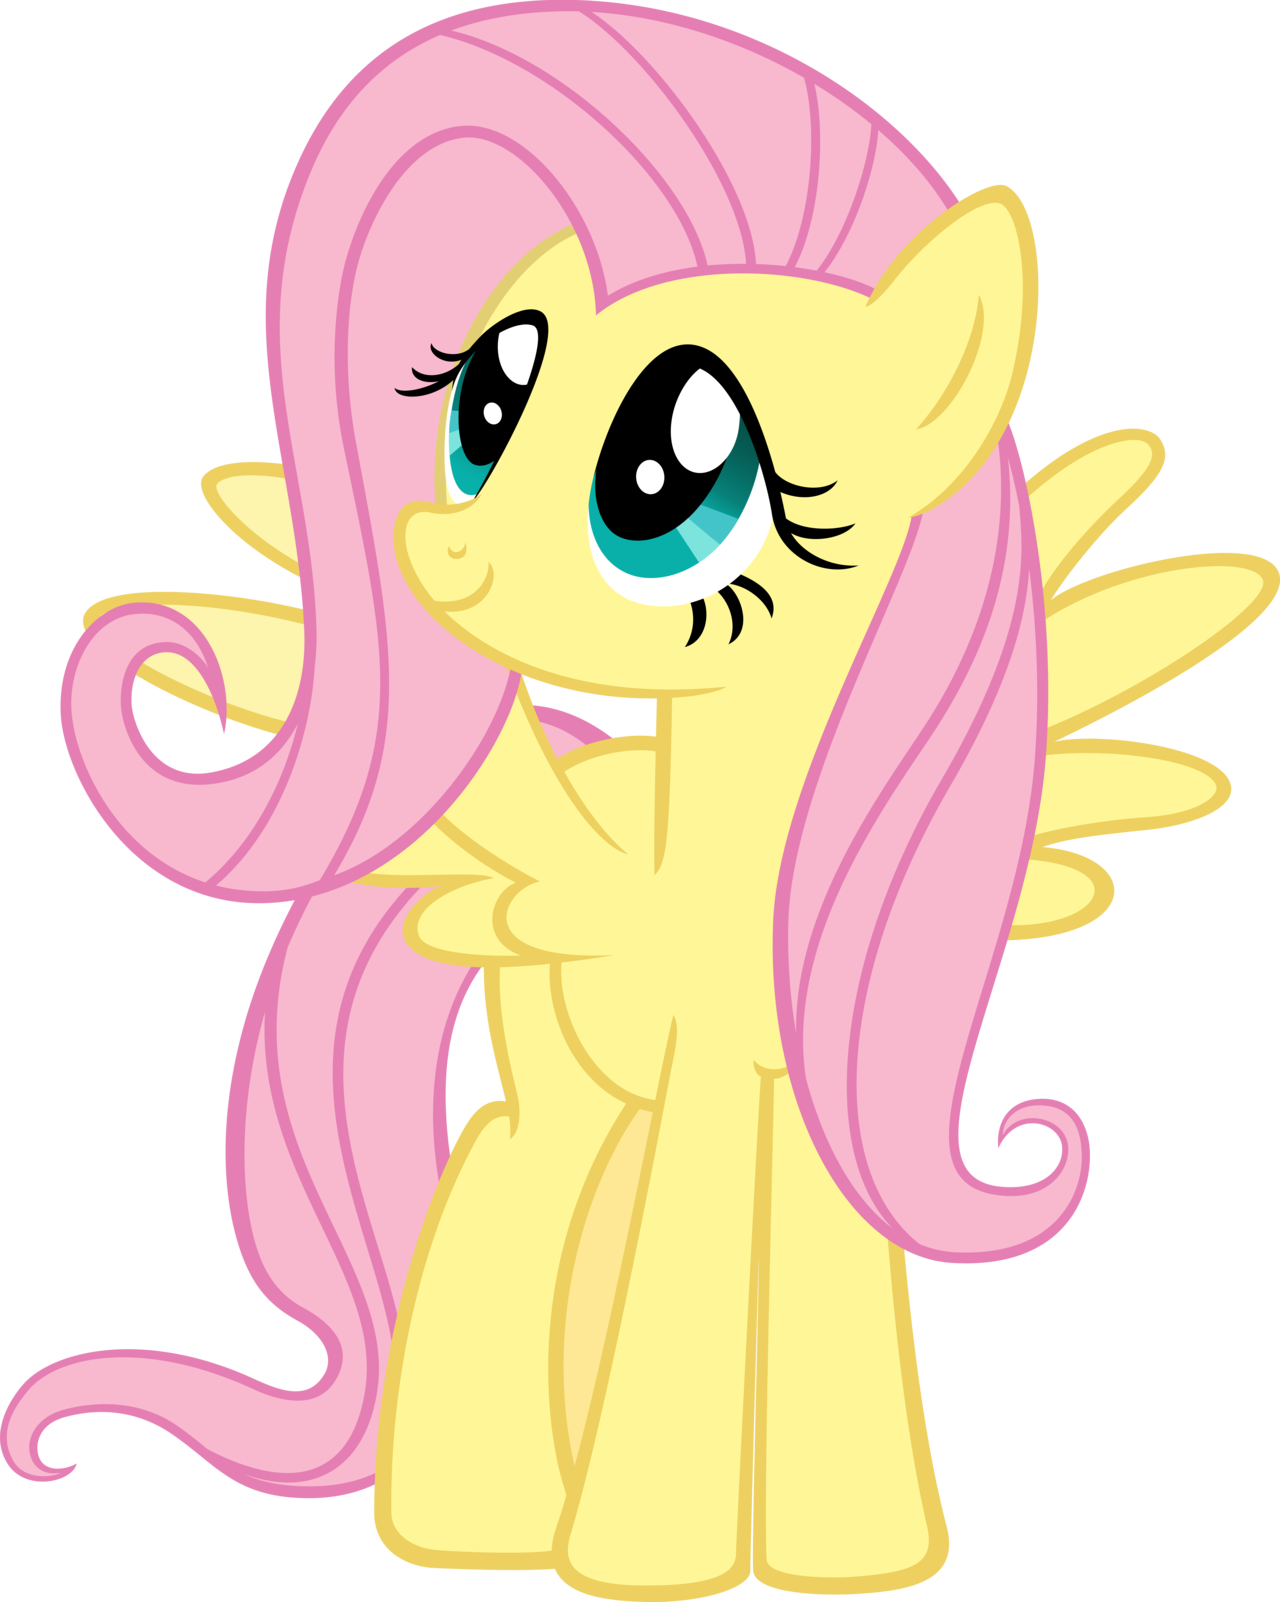 408 Best Fluttershy Images On Pinterest - My Little Pony Characters (1280x1602)